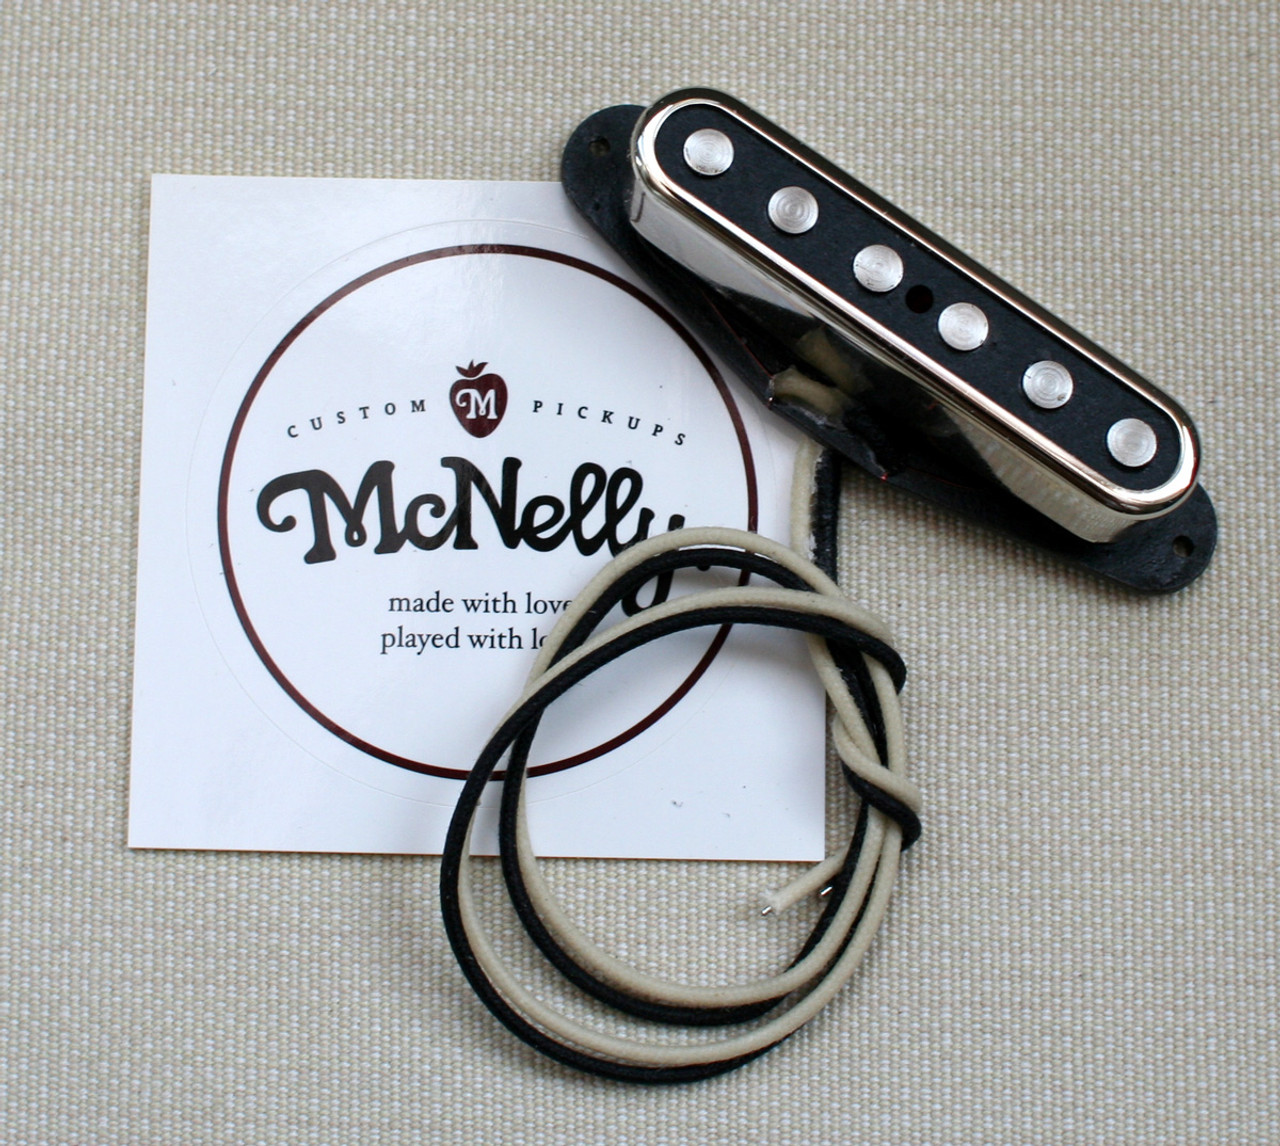 McNelly Pickups Duckling Strat Style Neck Pickup for Tele - open nickel